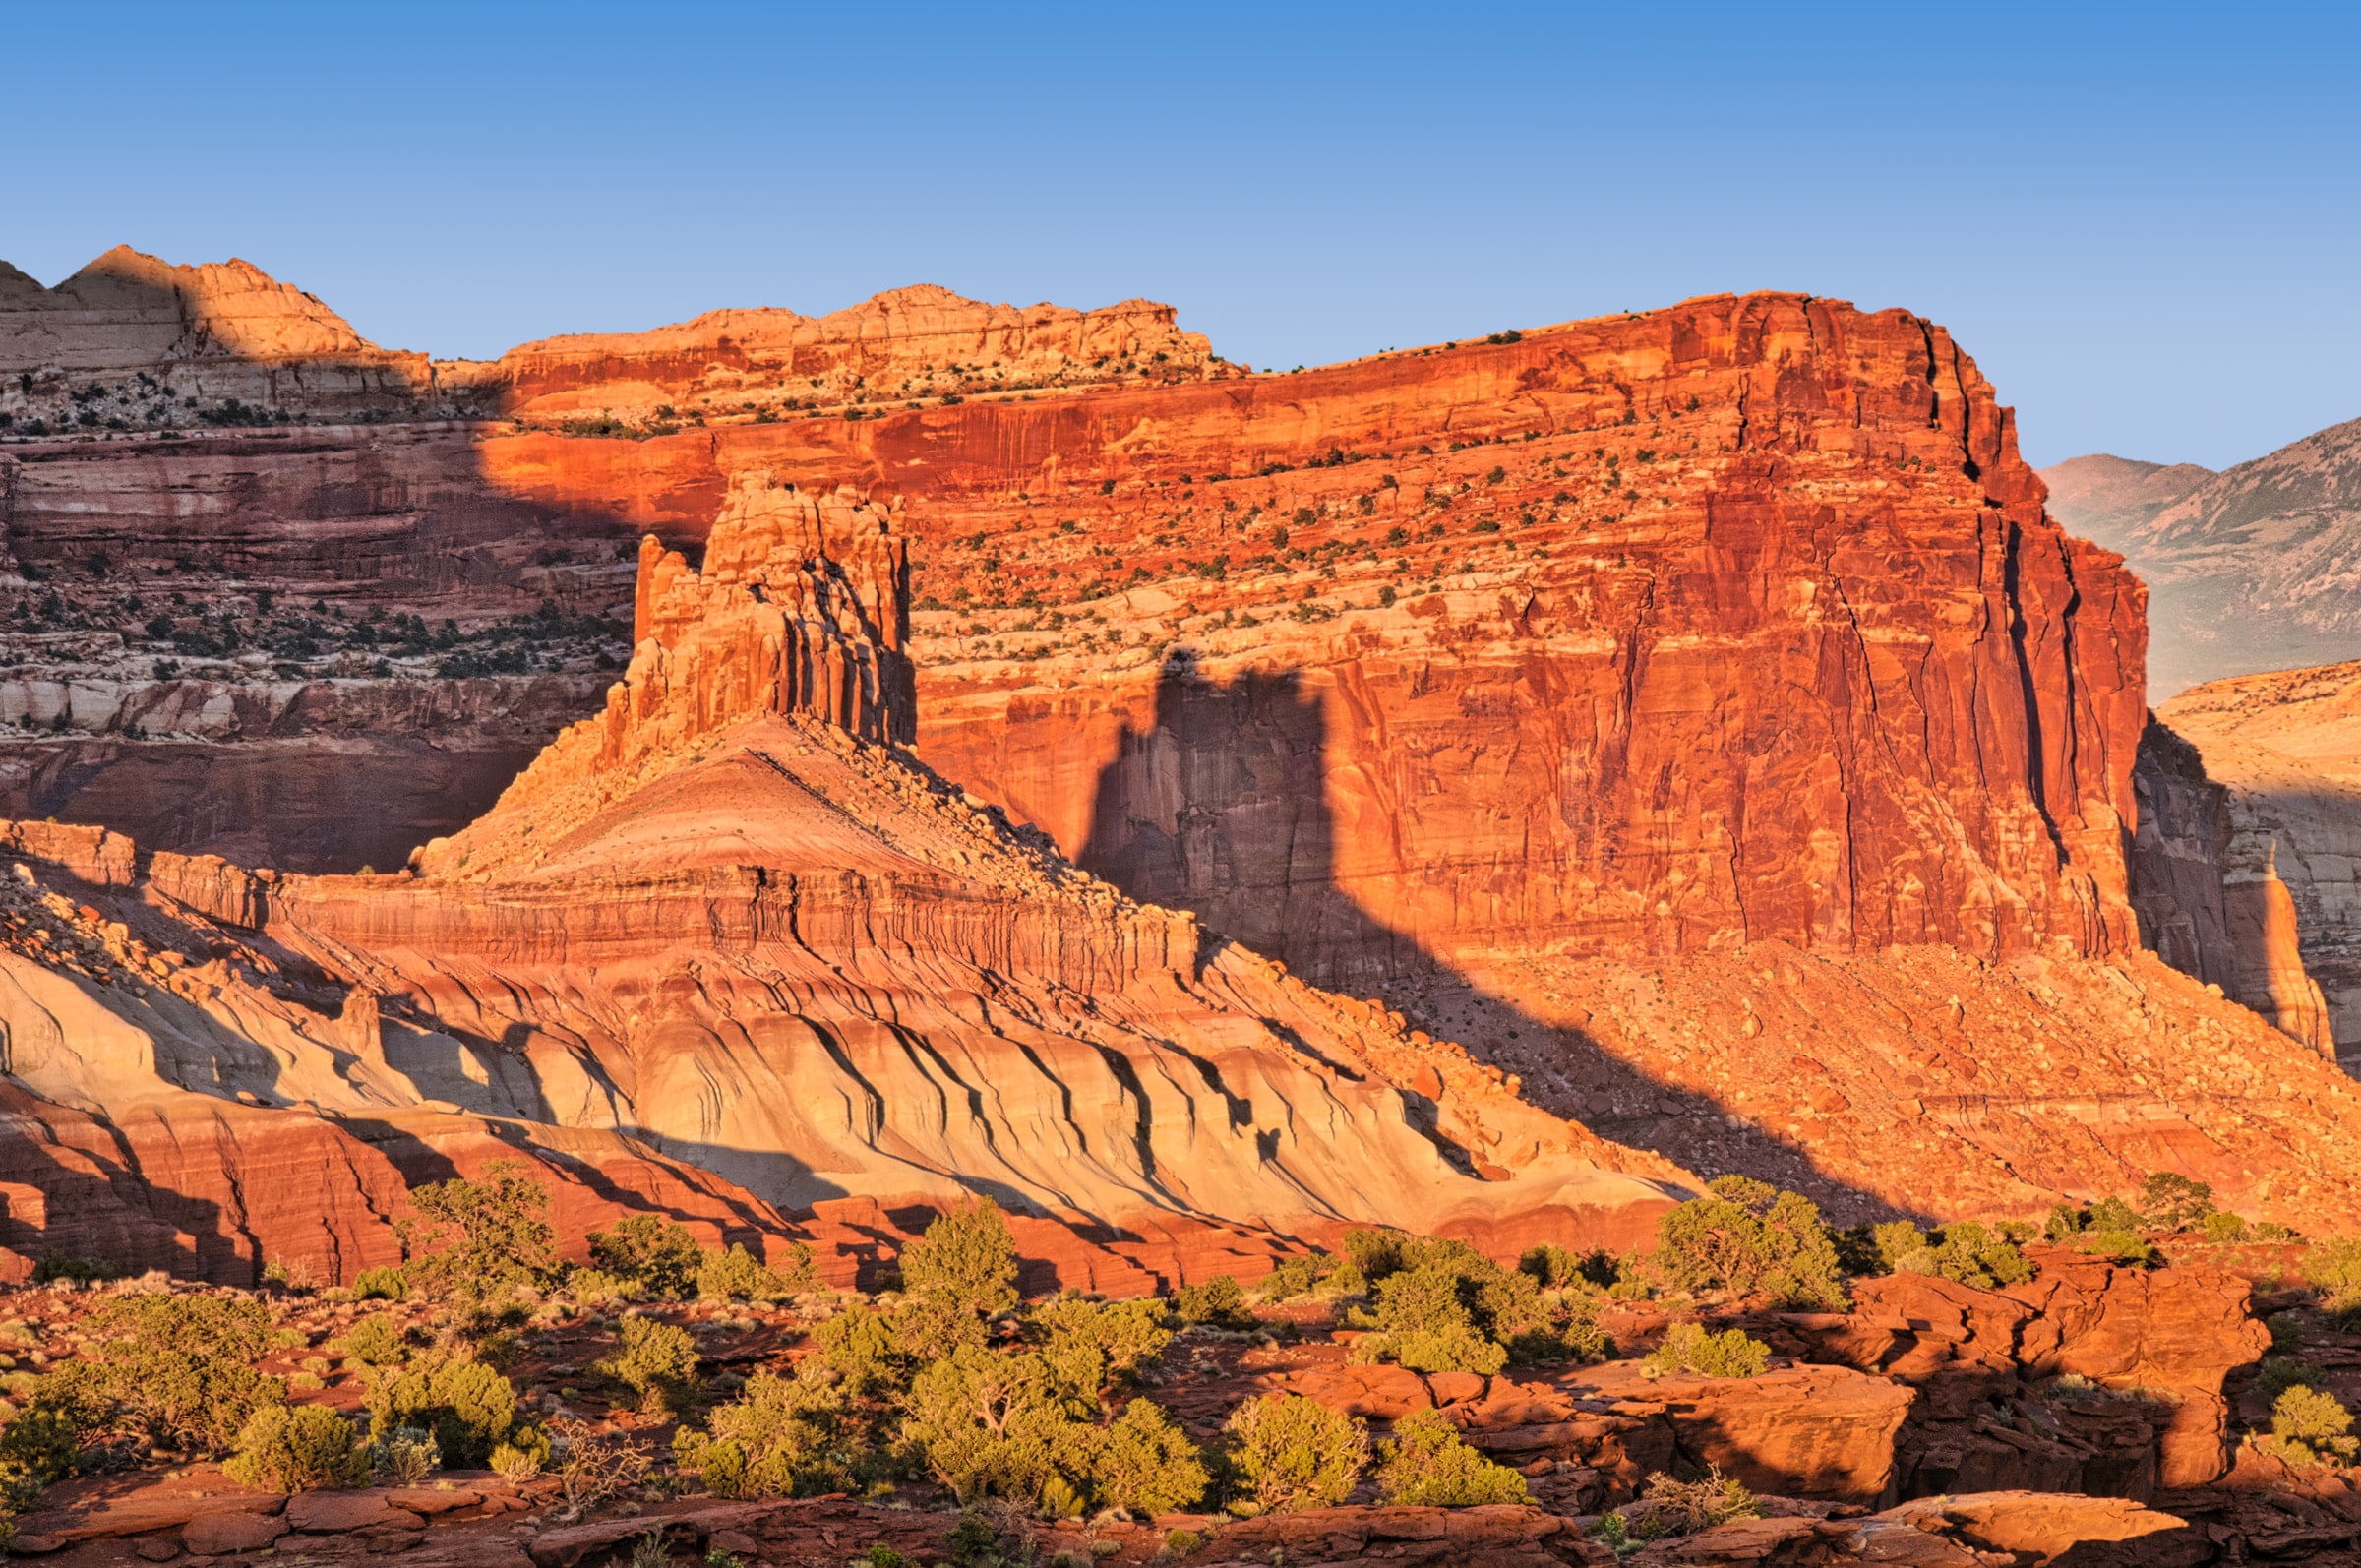 Late afternoon sun casts shadows as seen from Panorama Point along Highway 24 in Capitol Reef National Park, Utah.